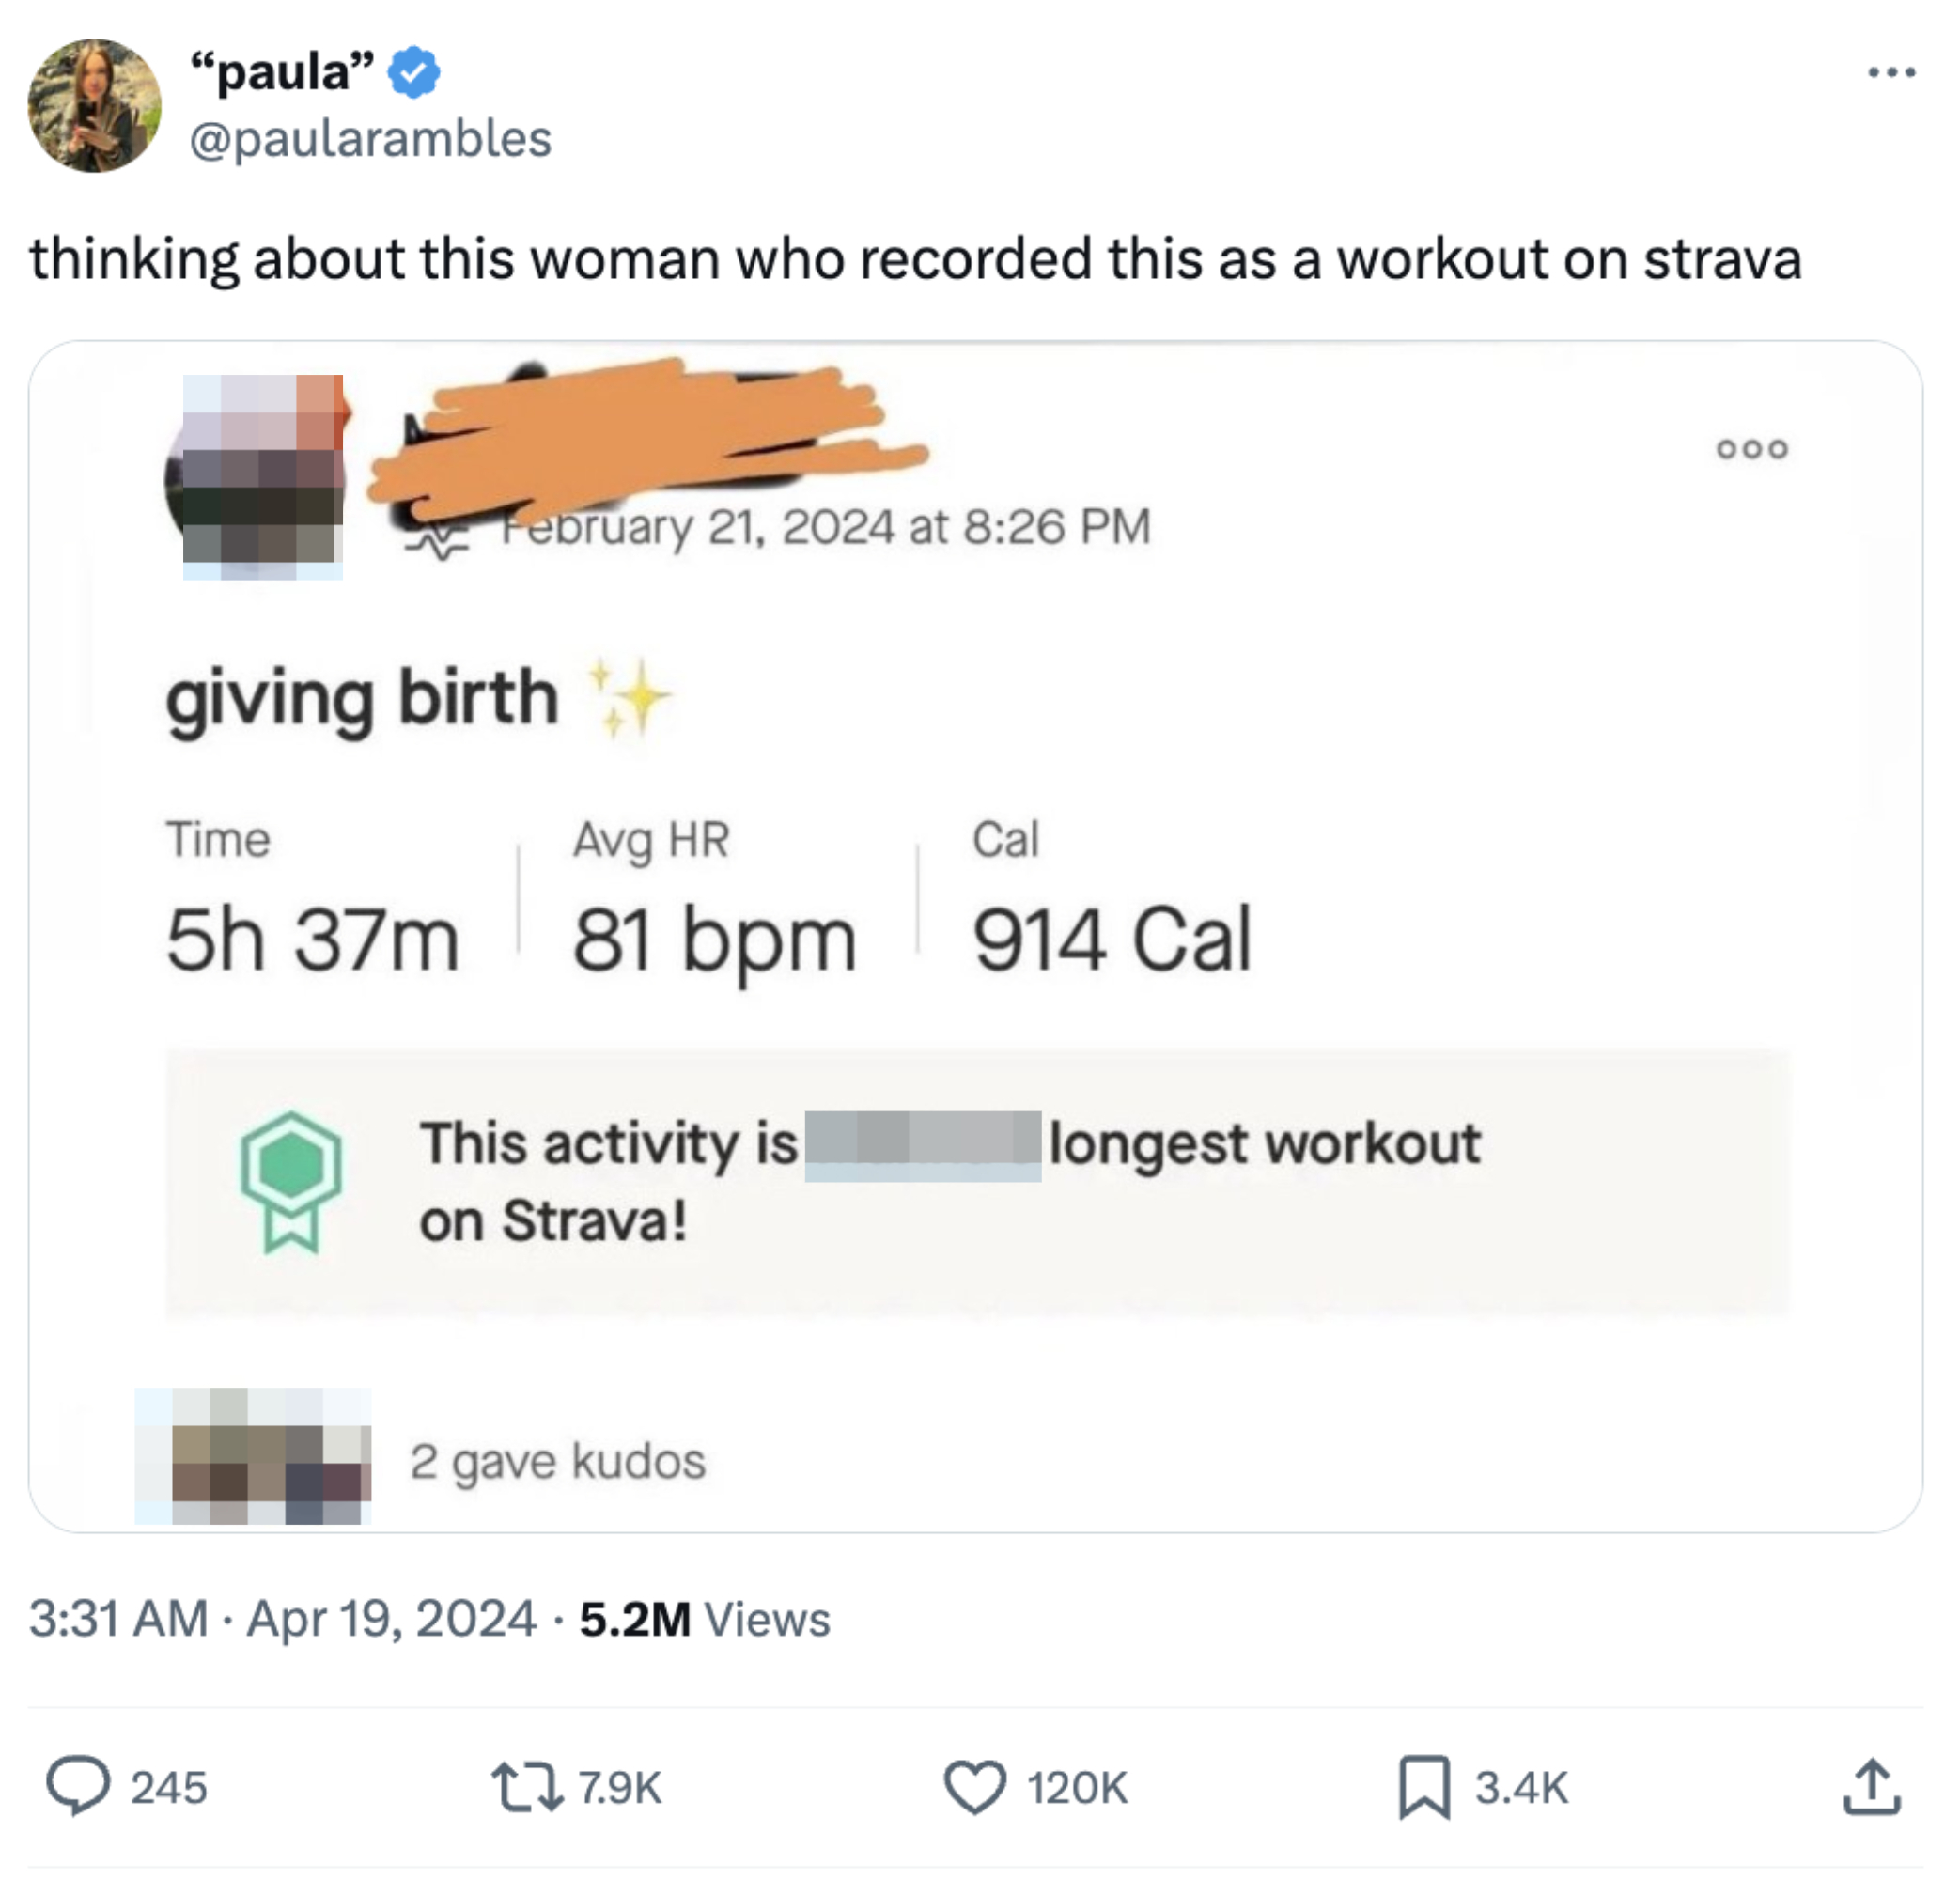 Screenshot of a tweet joking about a Strava workout during childbirth labeled &quot;giving birth,&quot; with 5h 37m duration, 81 bpm, 914 Cal burned